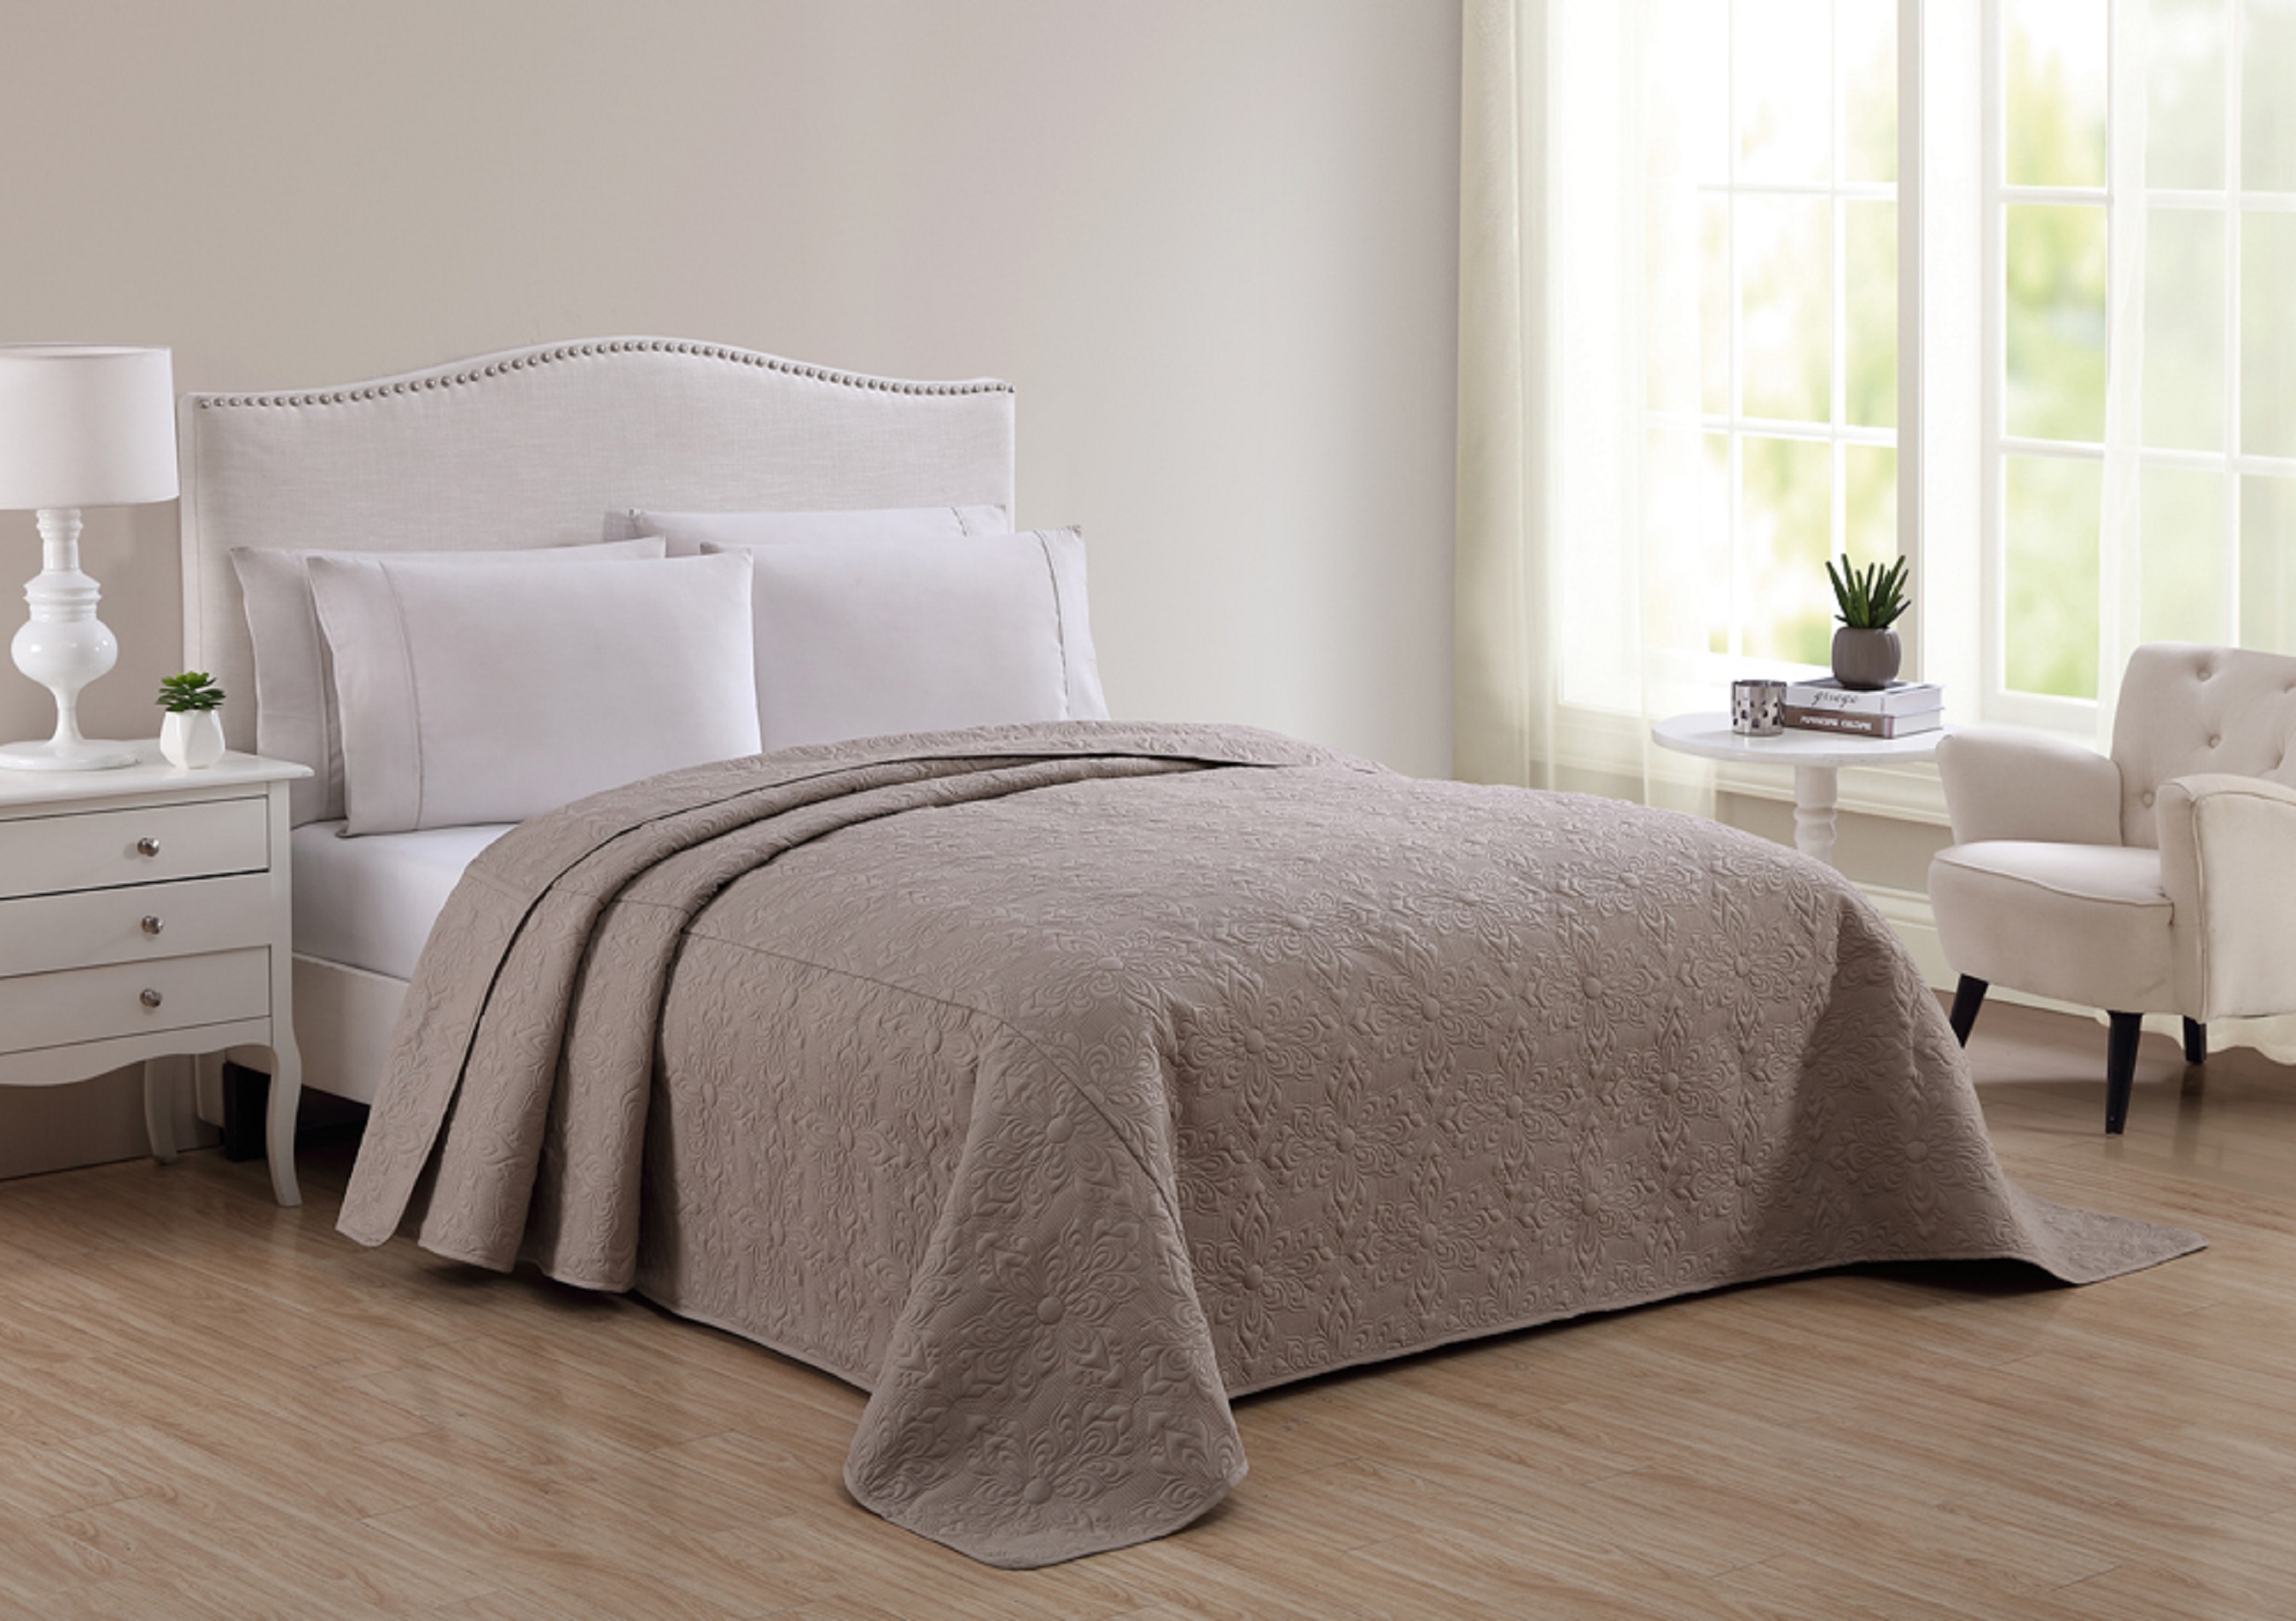 Cannon Solid Pinsonic Bedspread - Taupe